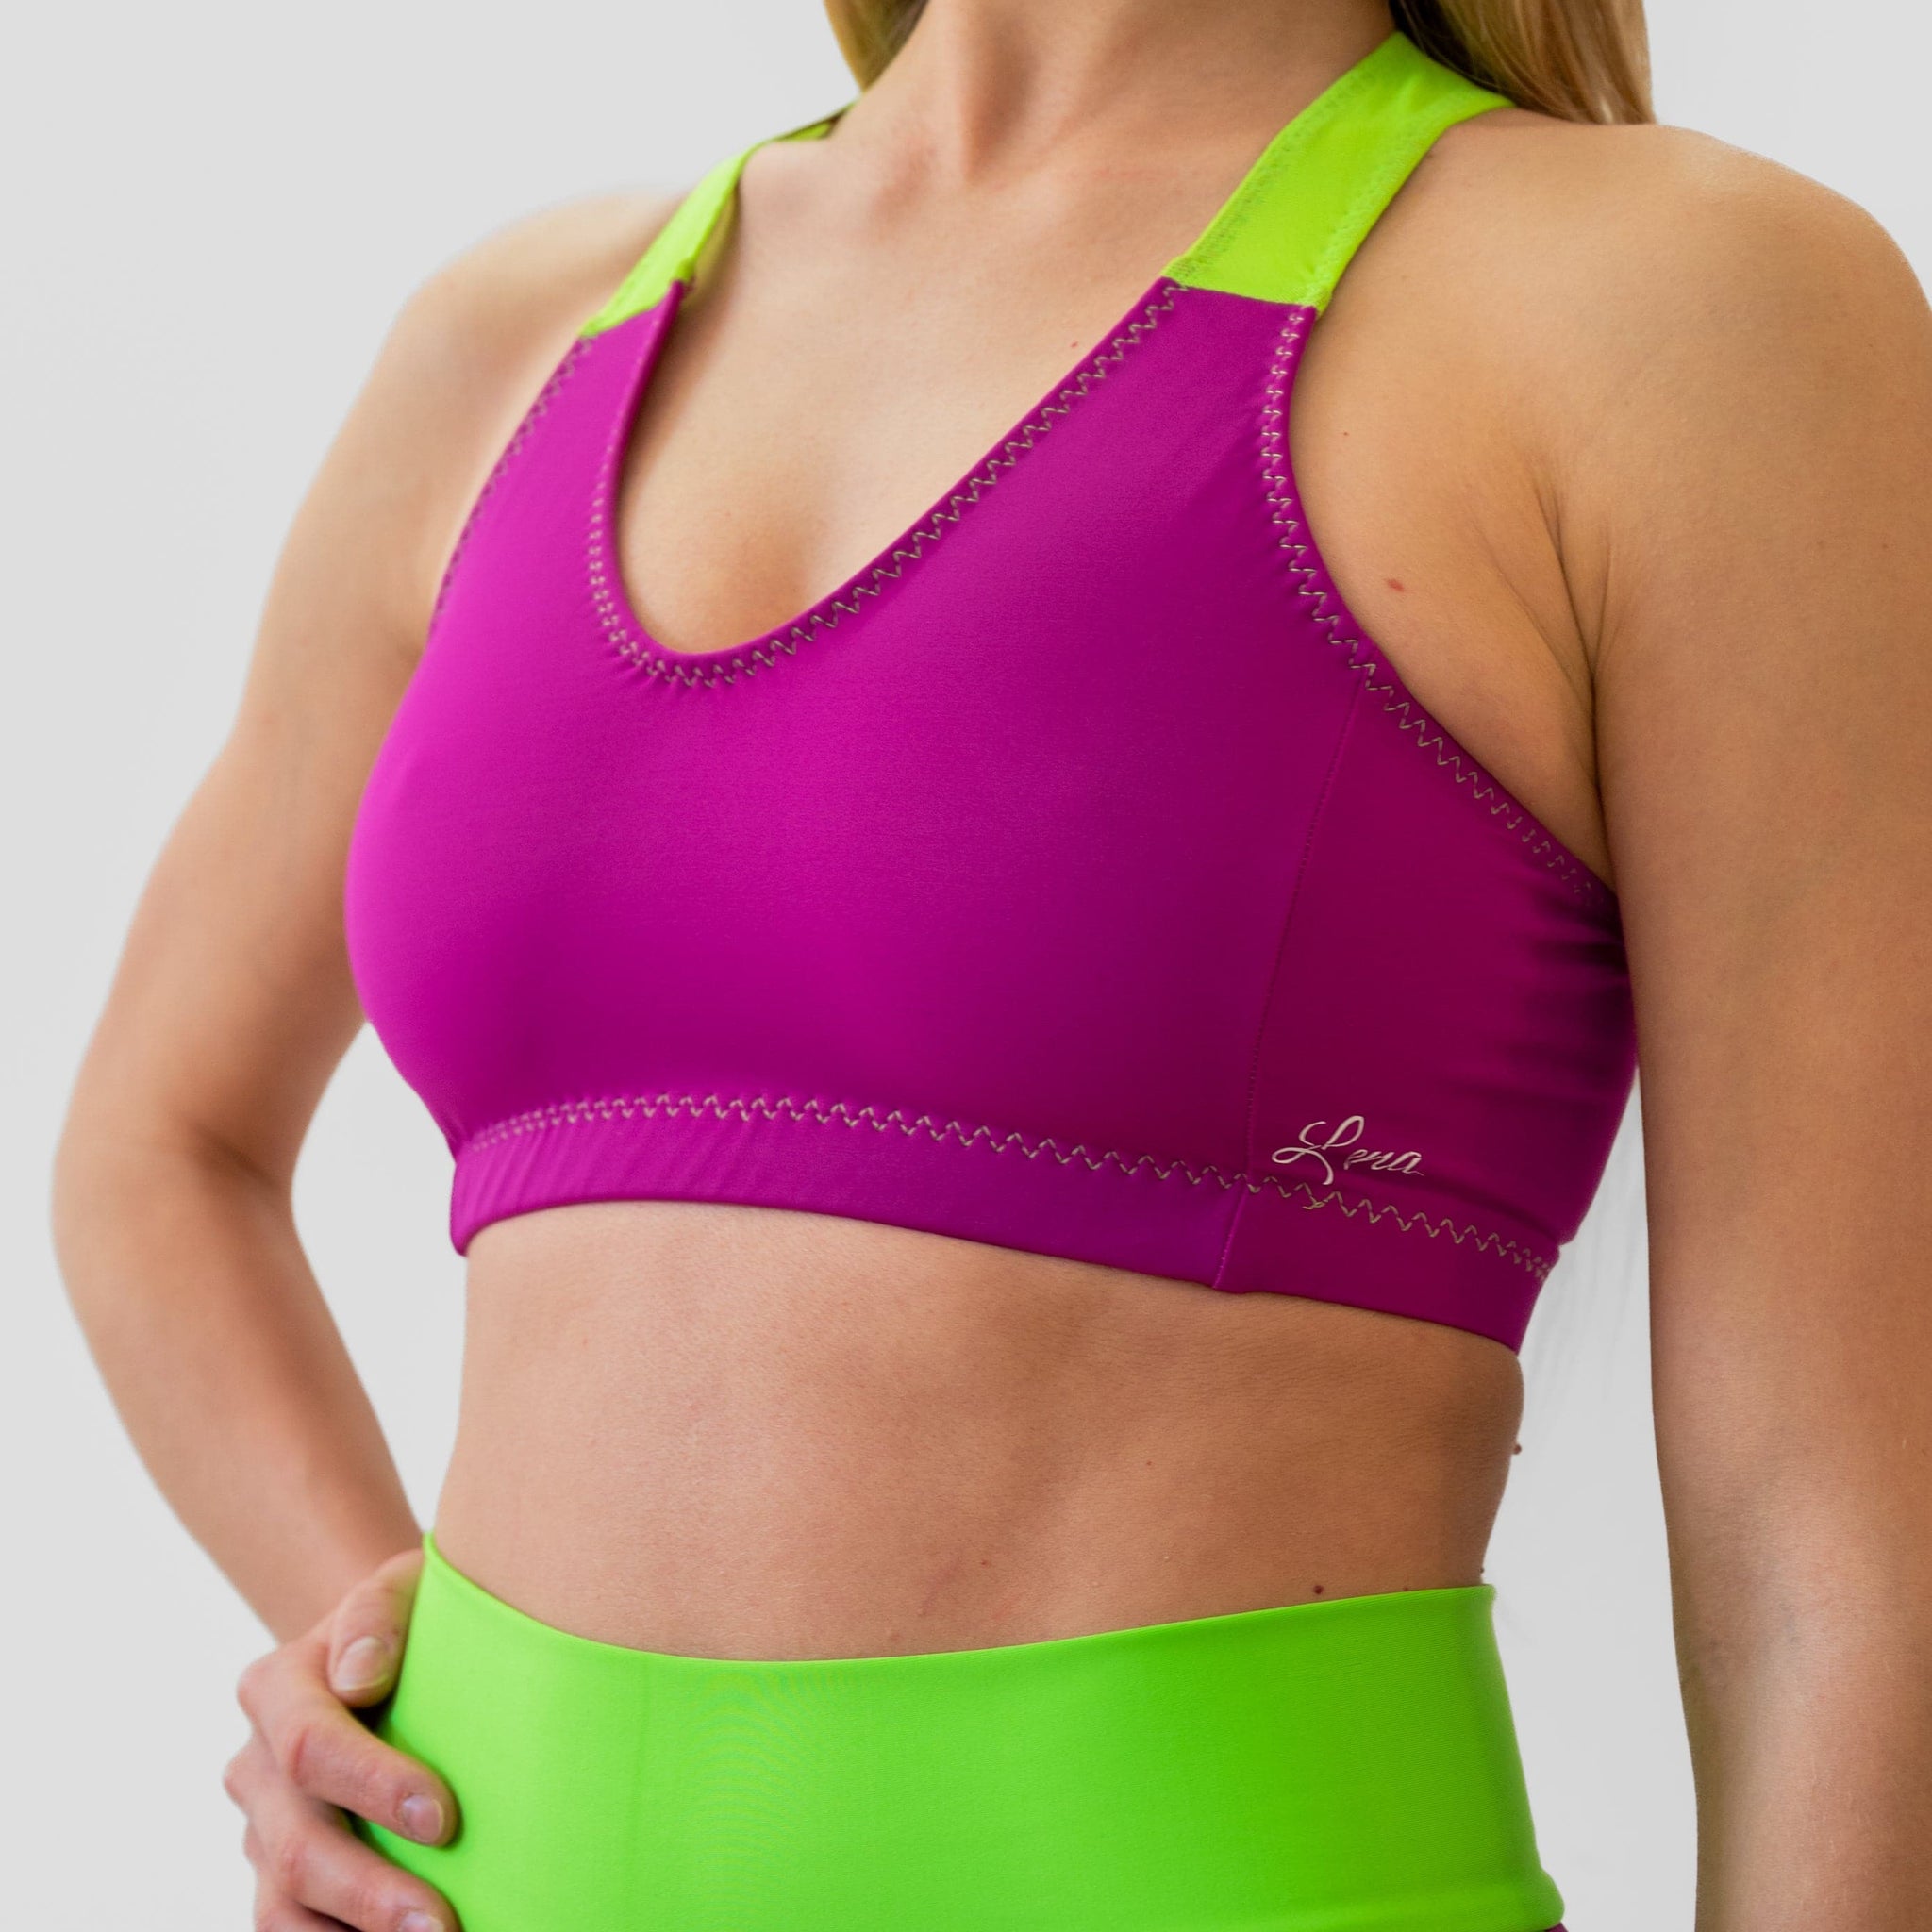 Women's Wisteria and Green Crop Top for Fitness and Yoga Workout by LENA Activewear